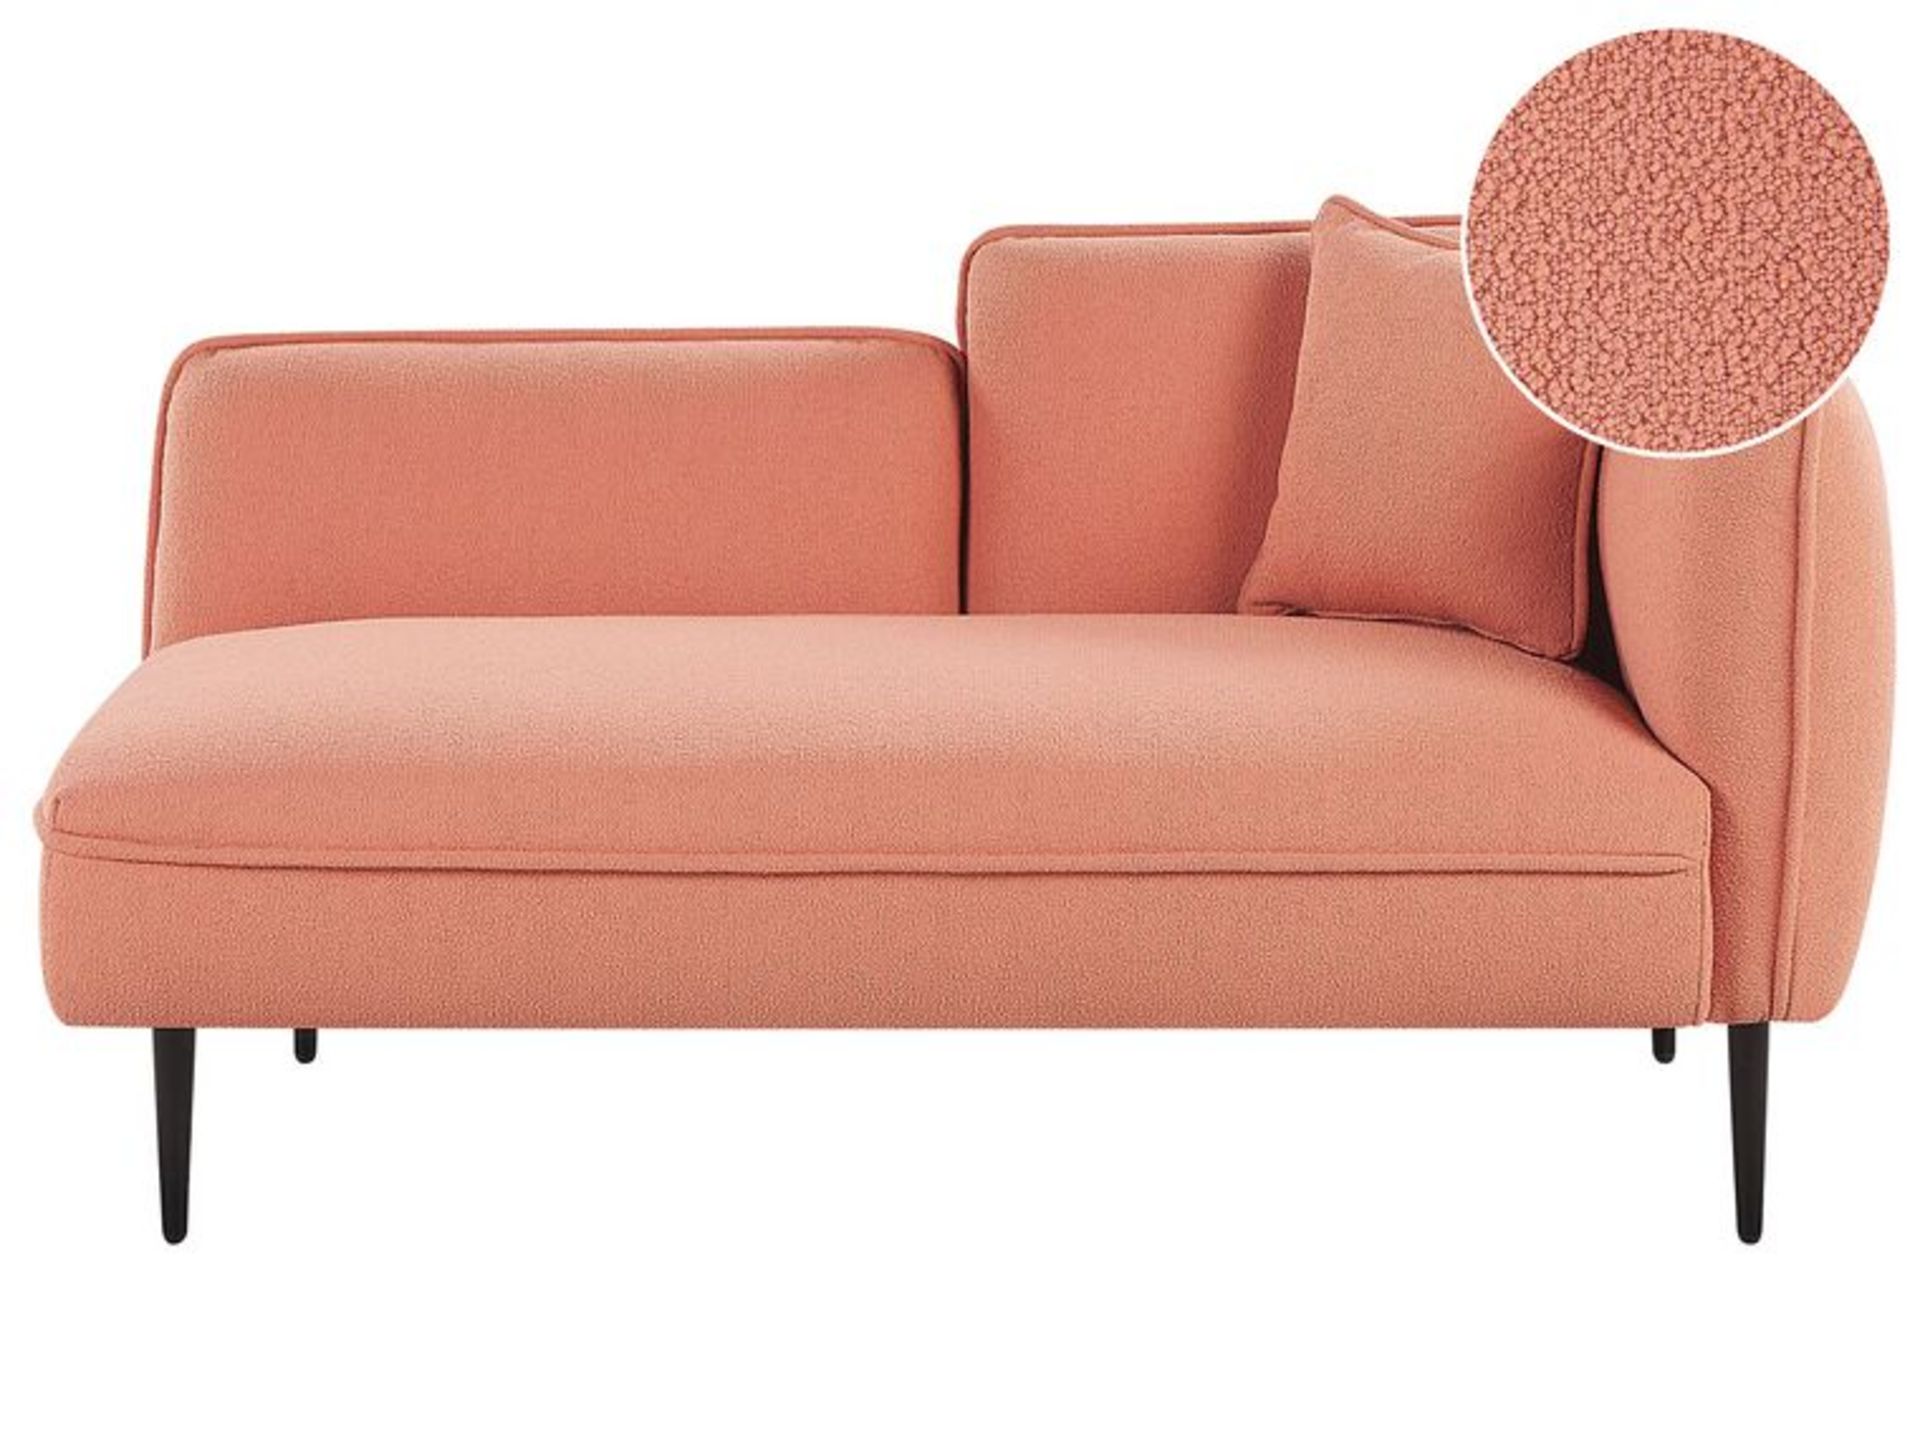 Chevannes Right Hand Boucle Chaise Lounge Peach Pink. - R14.1. - RRP £649.00. T - Bild 2 aus 2